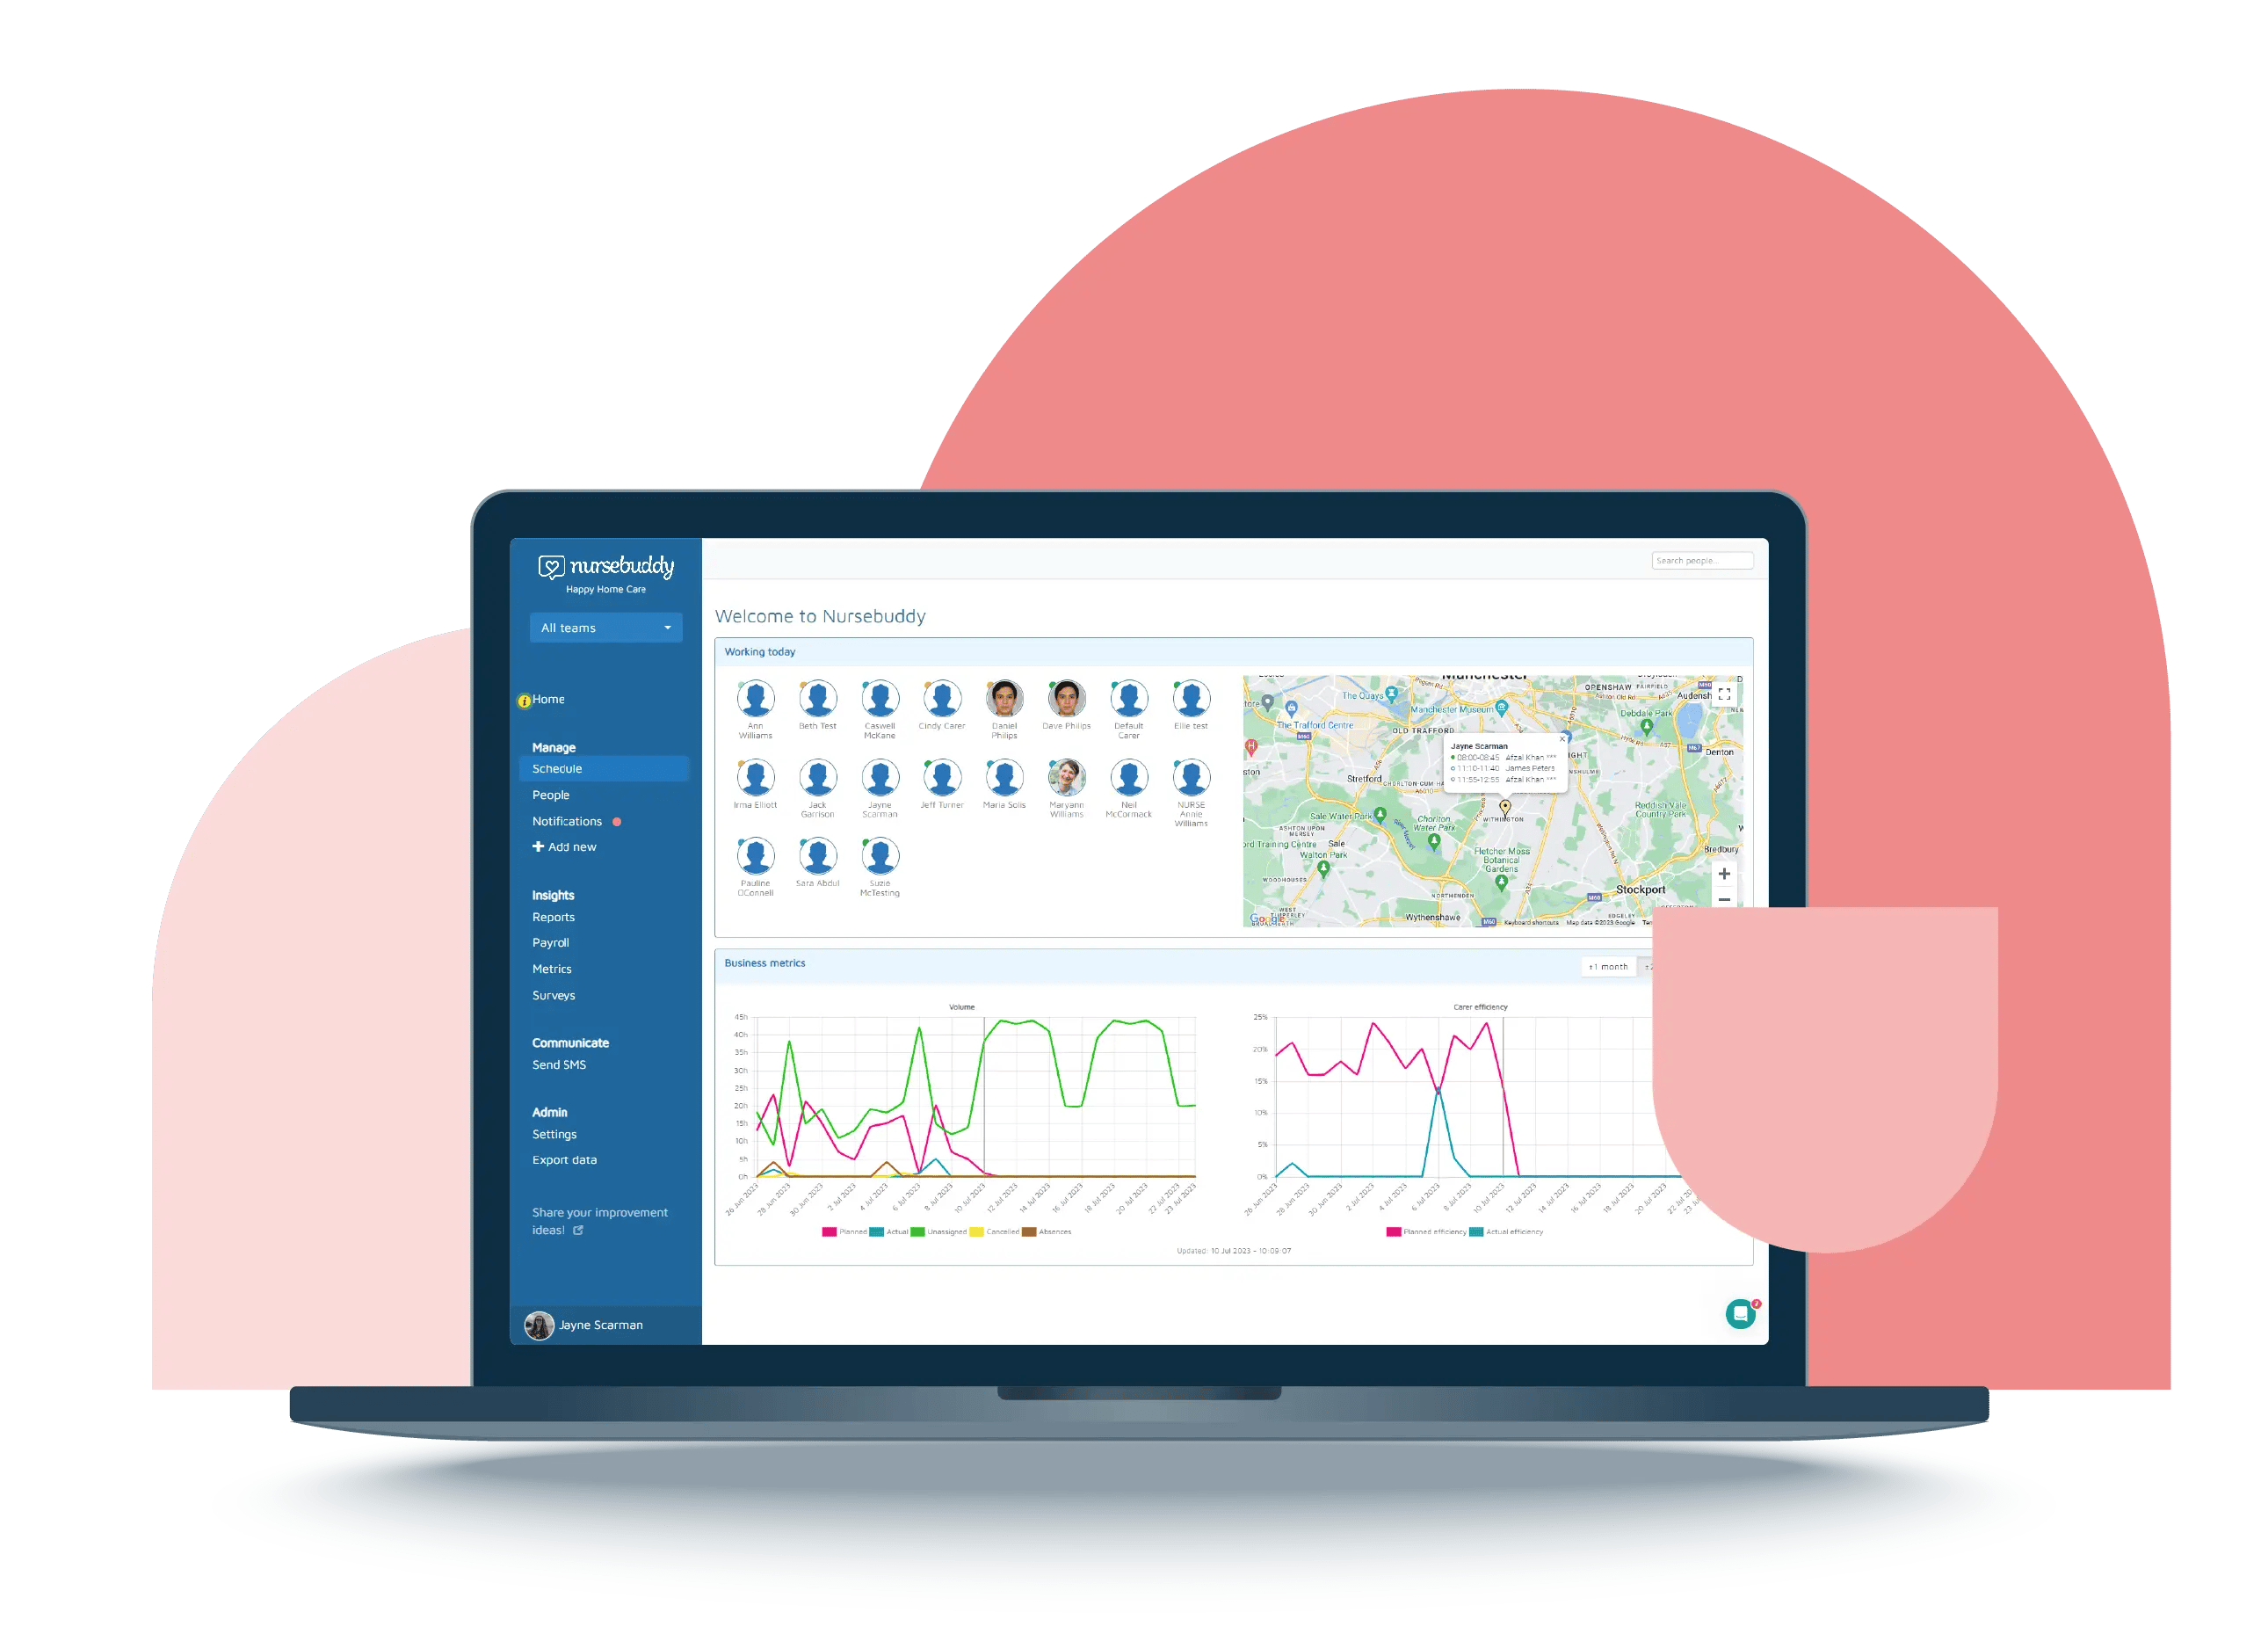 The Nursebuddy home screen showing carers working today, a map with their location and two charts showing business metrics